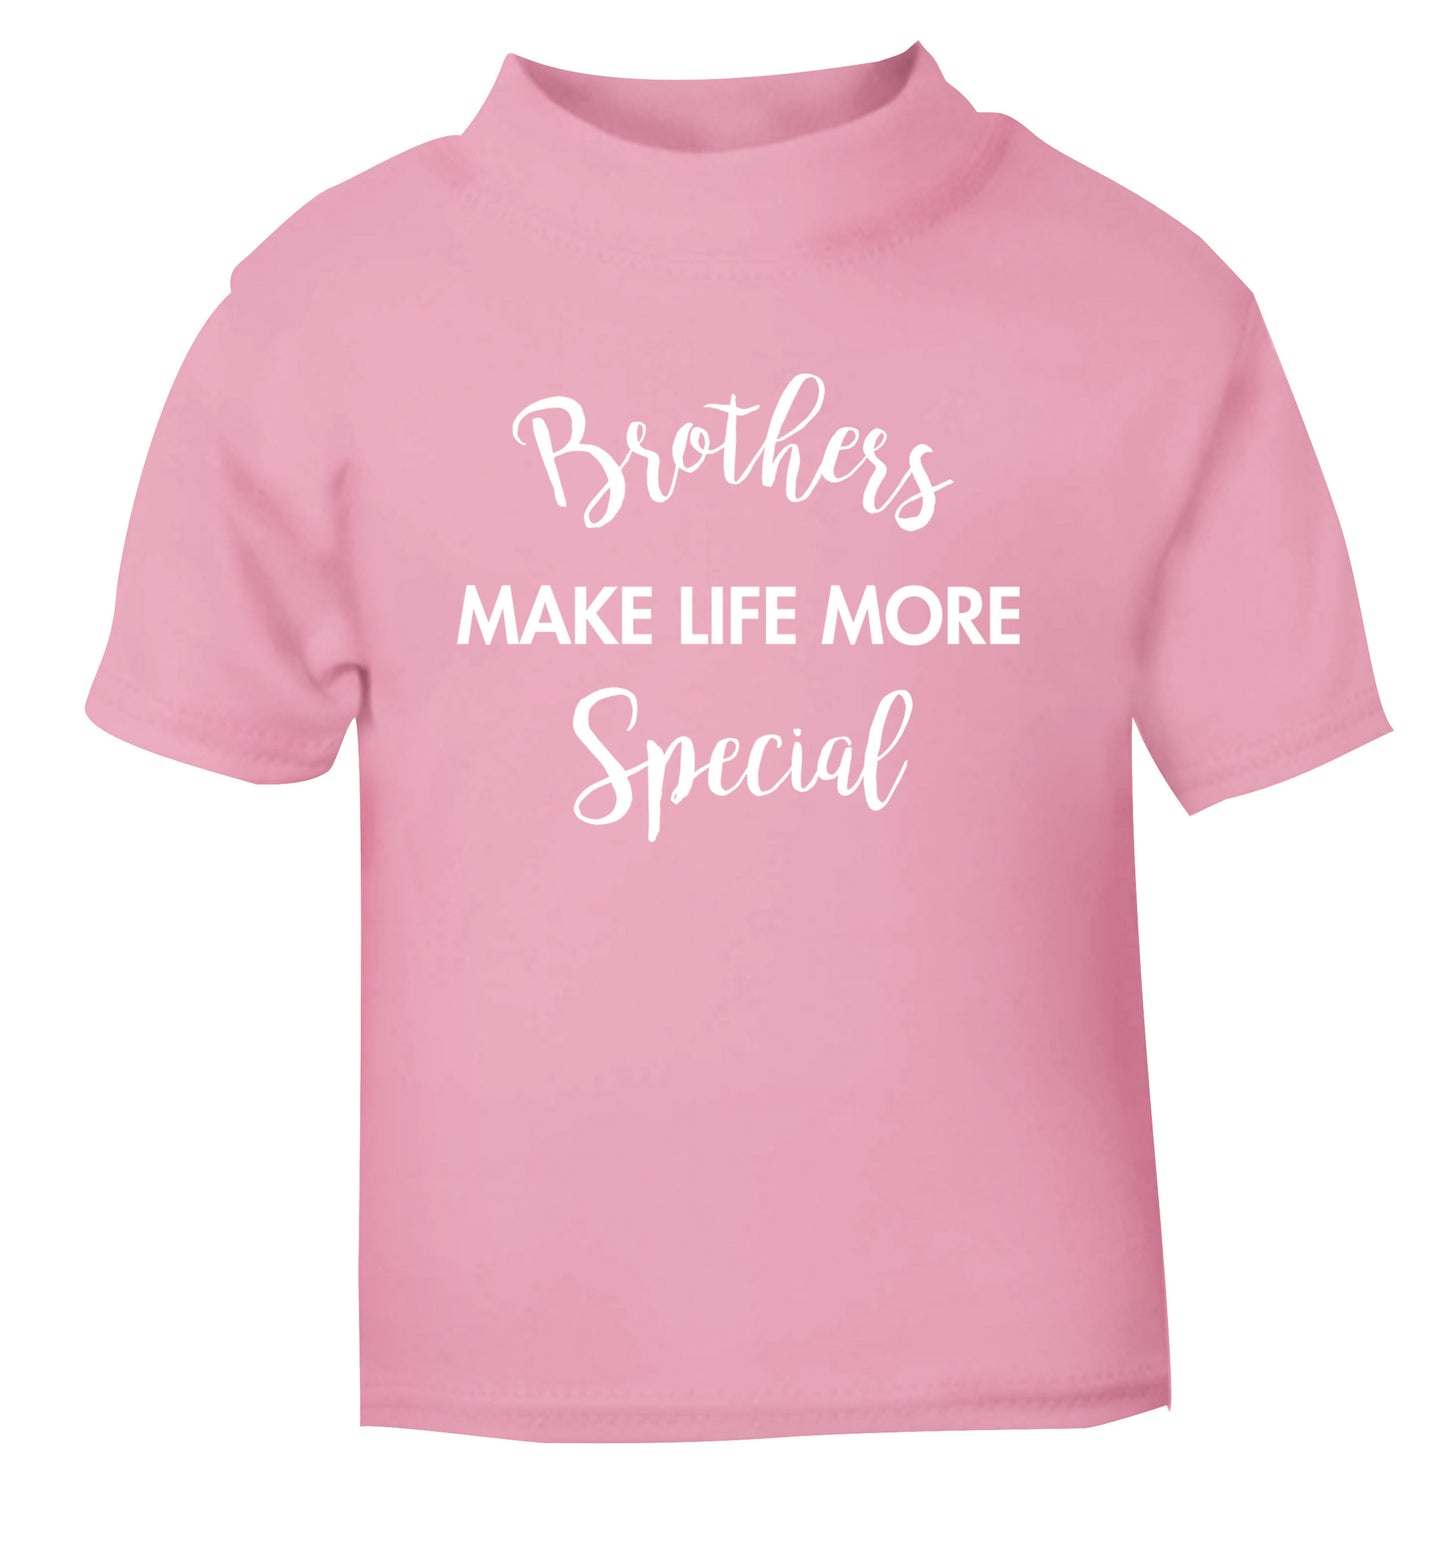 Brothers make life more special light pink Baby Toddler Tshirt 2 Years